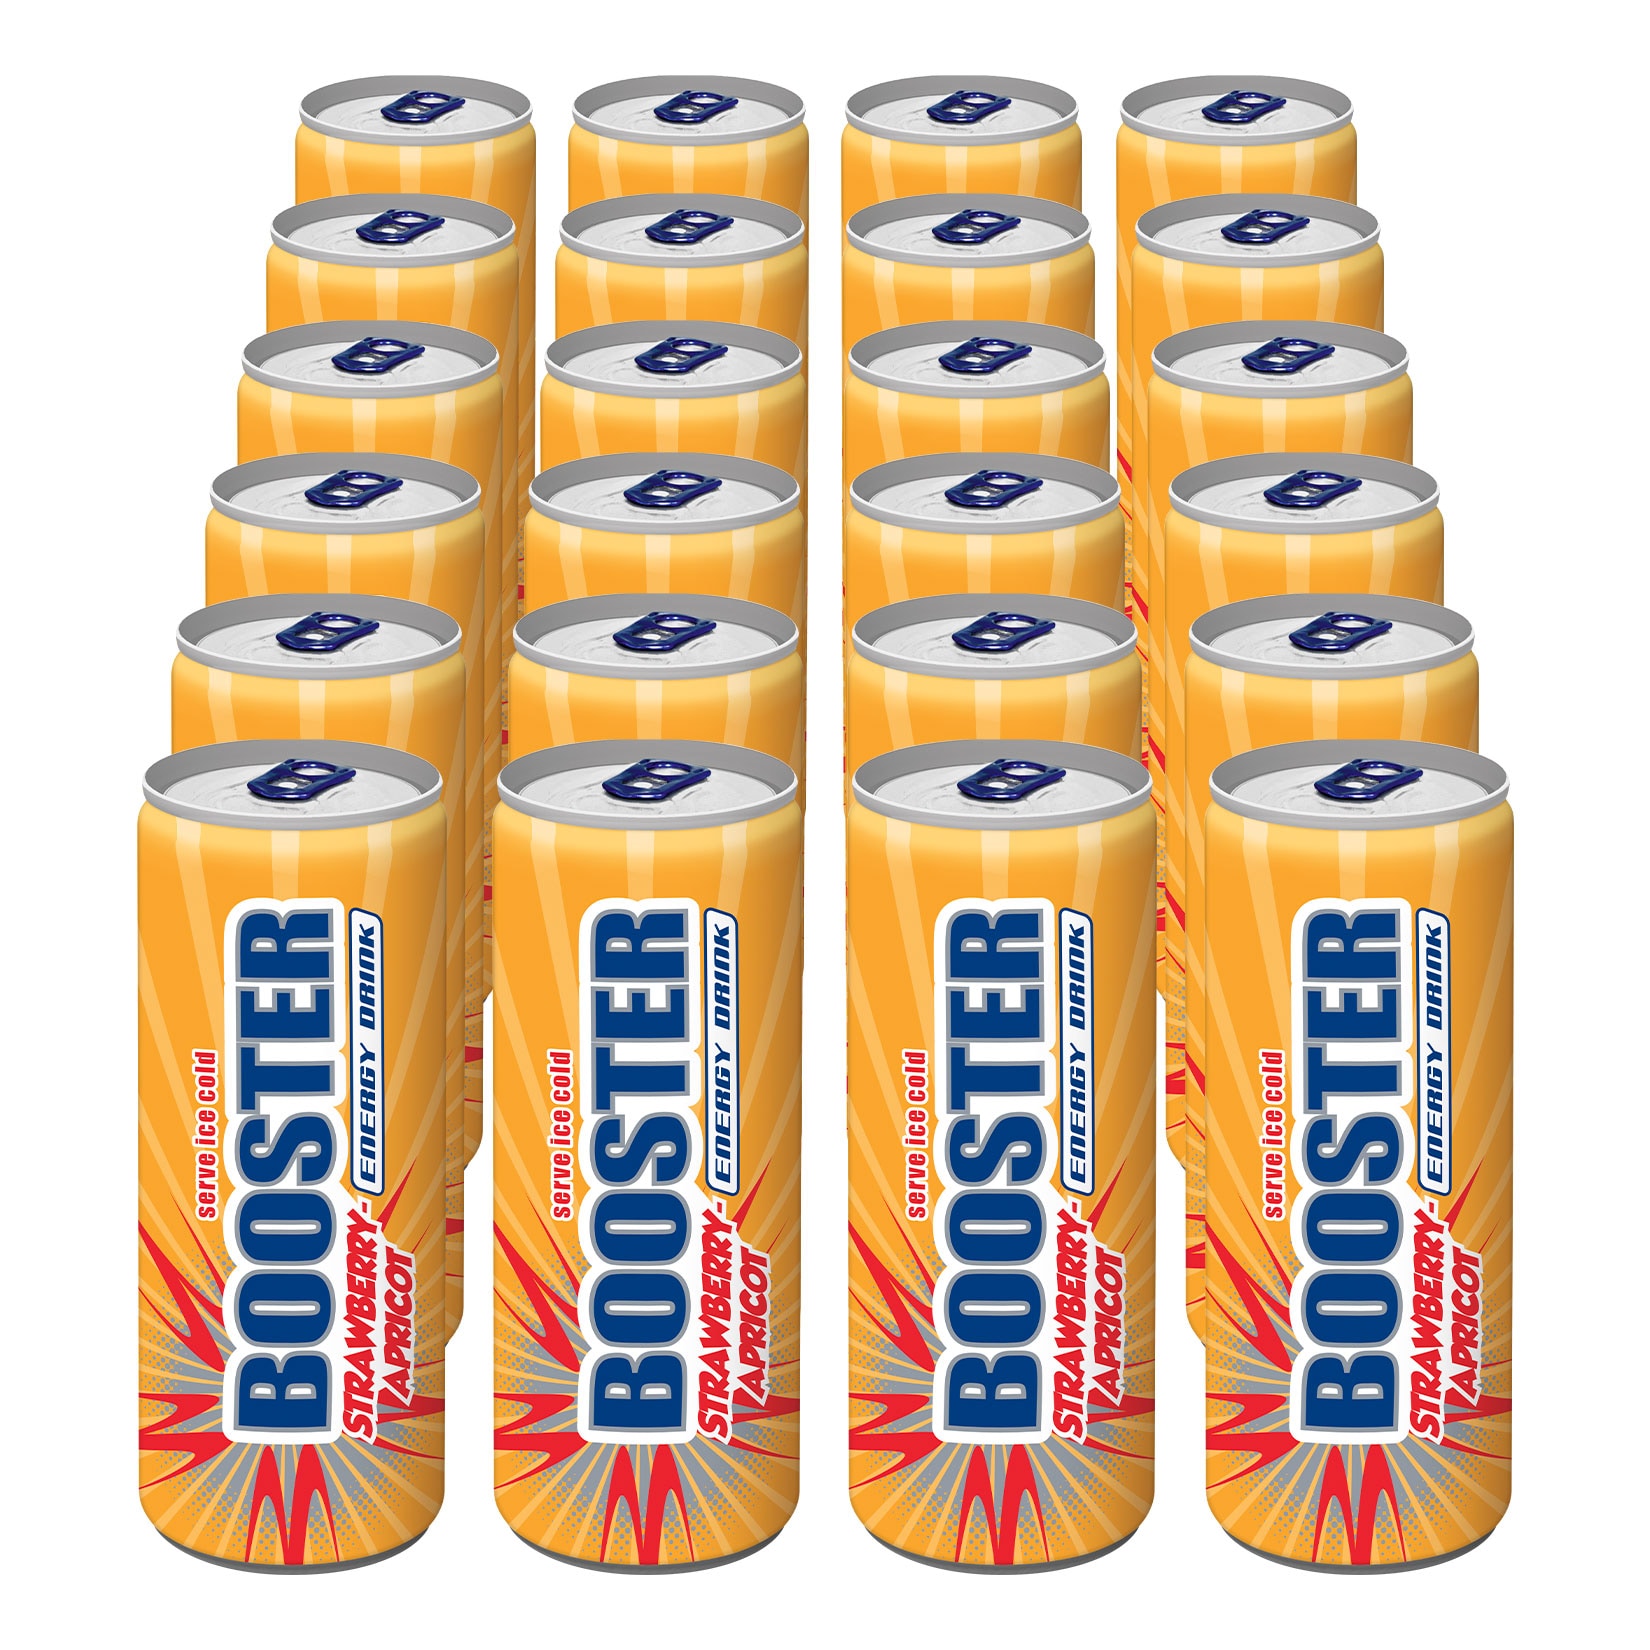 Booster Energy Strawberry-Apricot 0,33 Liter Dose, 24er Pack online kaufen  bei Netto